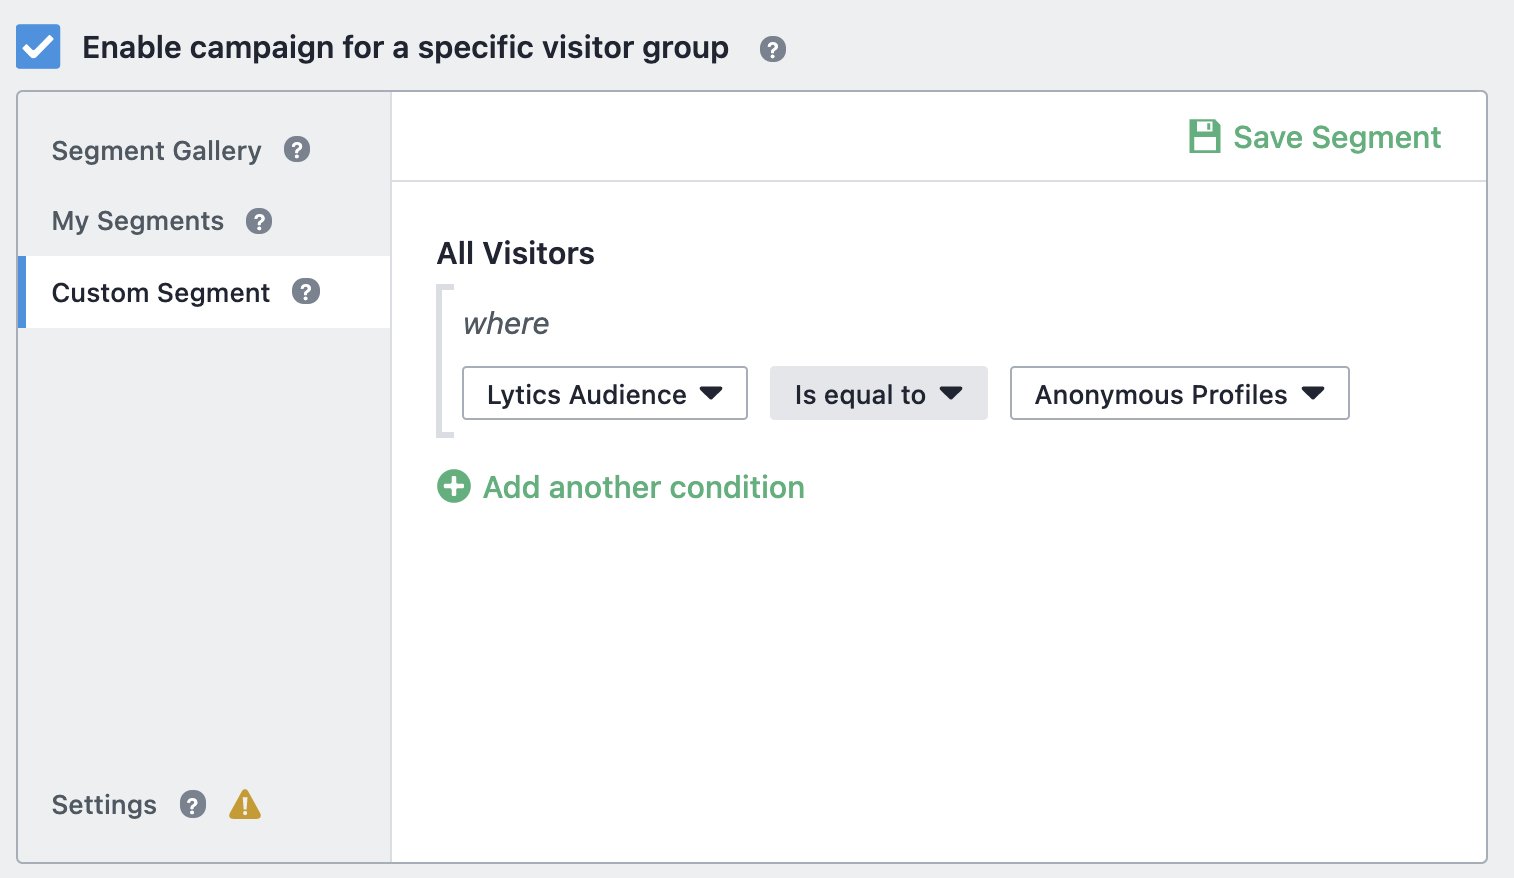 To target anonymous profiles within your Lytics audience